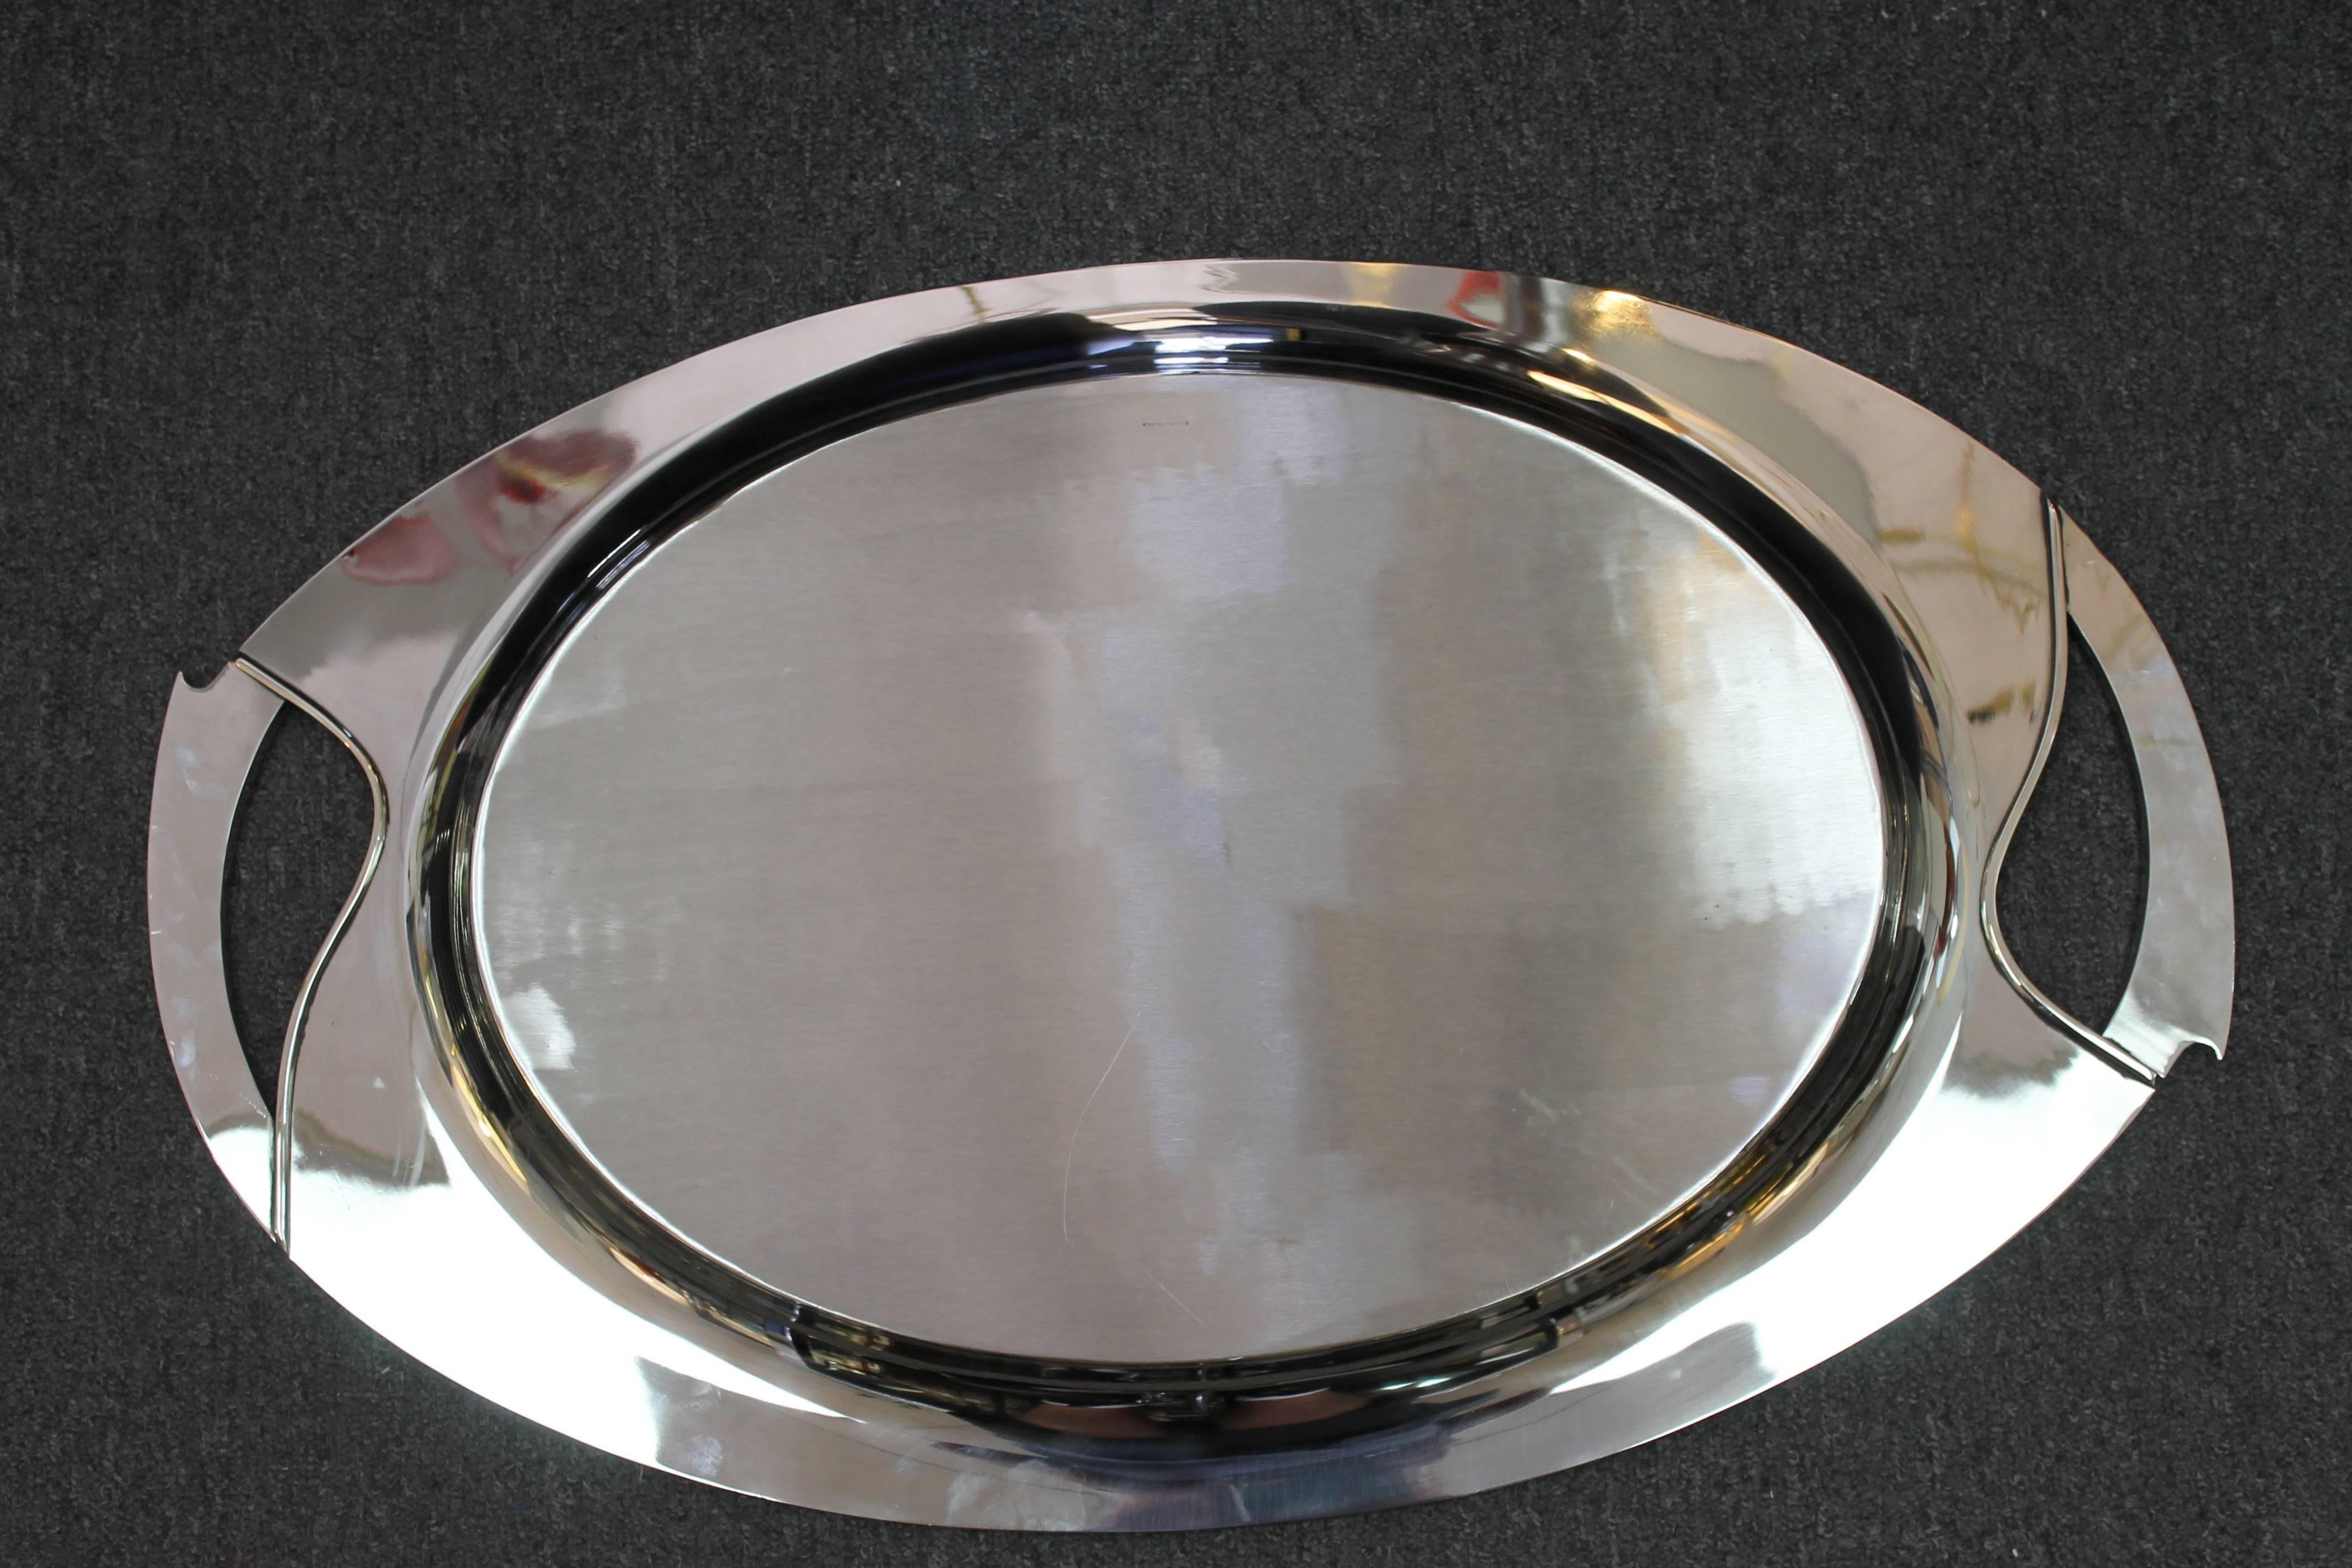 Monumental and heavy solid nickel silver tray with exquisite curvilinear design. Highest quality hand construction. Stamped Nickel Silver on the back. We believe this tray to be from the 1930's. We had it professionally polished. Tray measures 29.5”